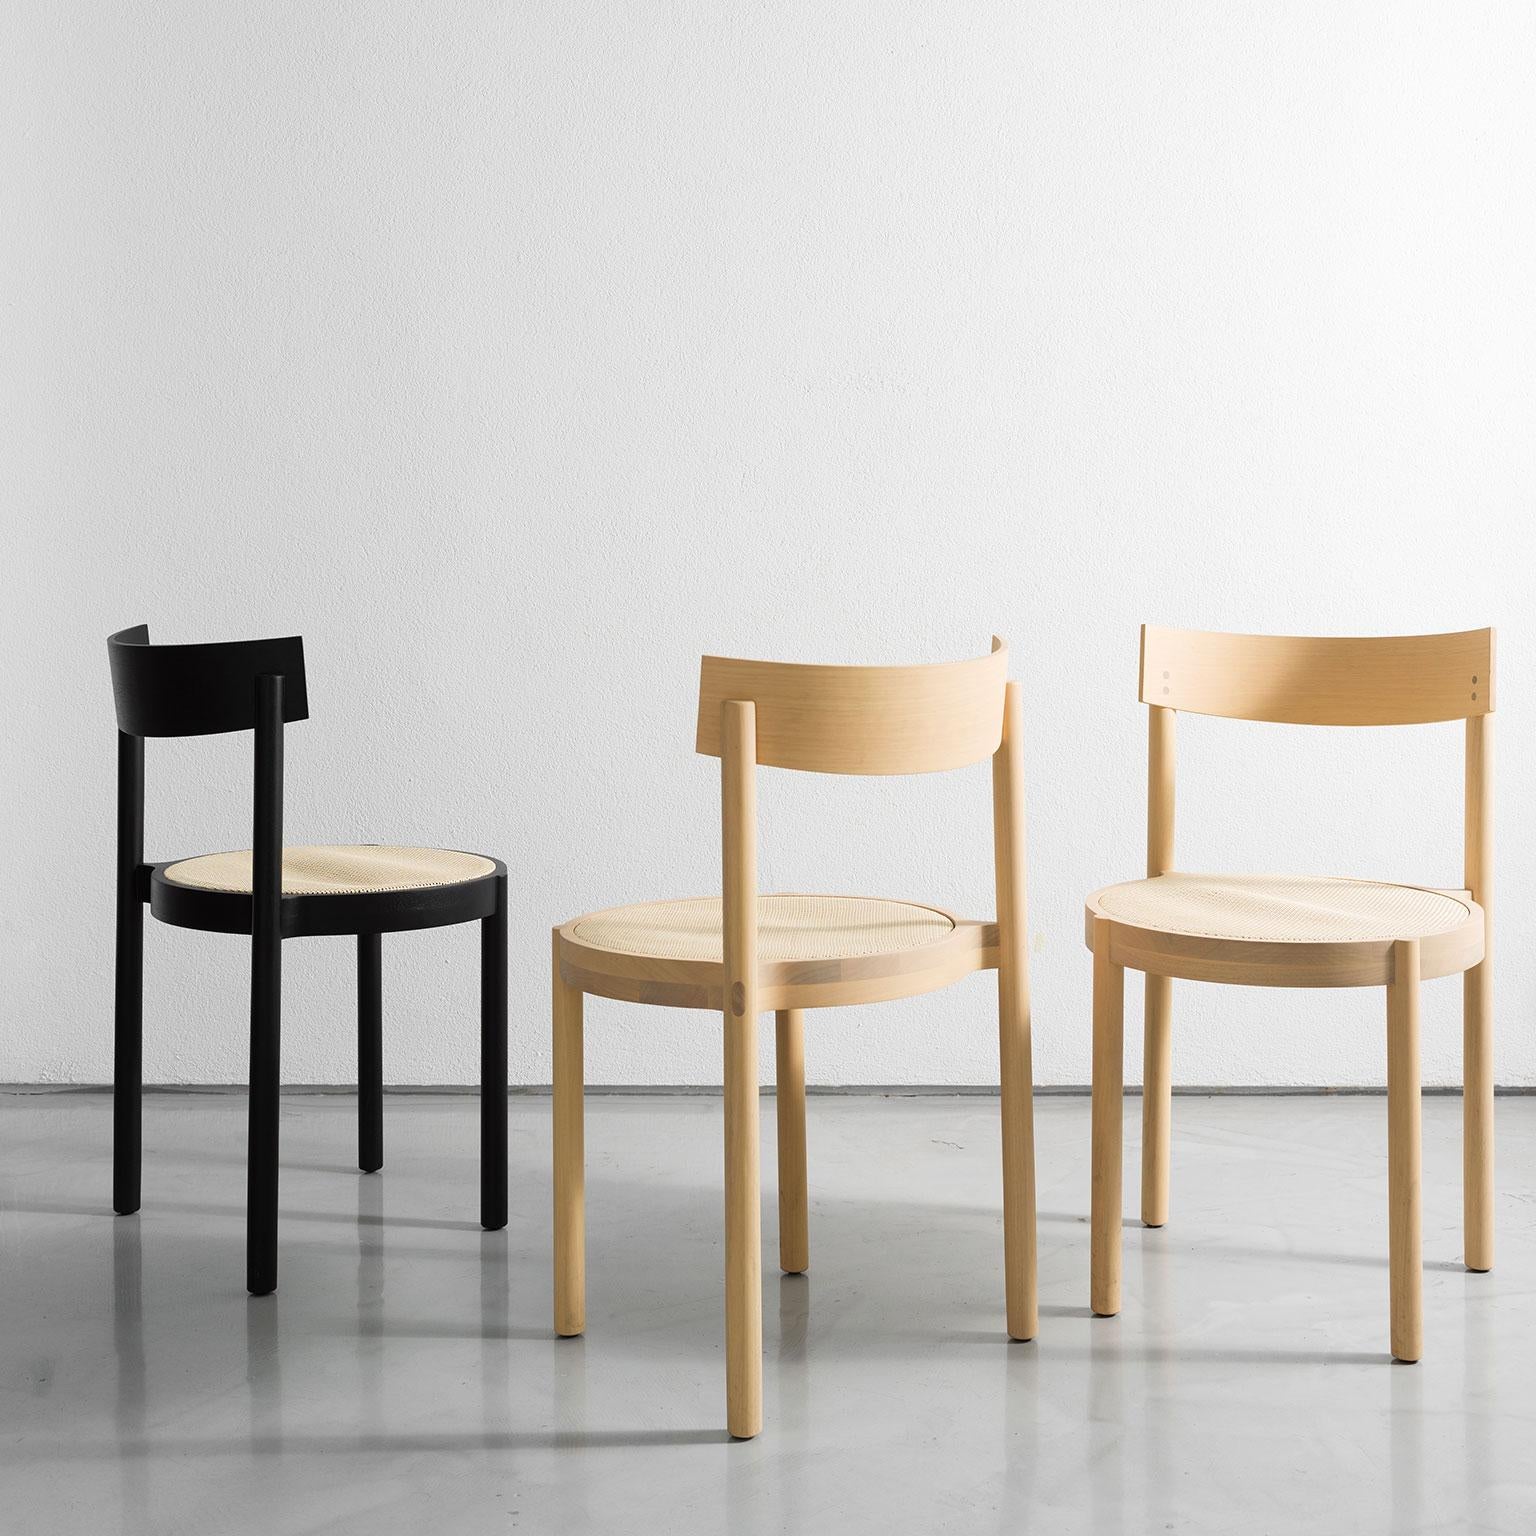 Caning Gravatá Chair in Black by Wentz, Brazilian Contemporary Design For Sale